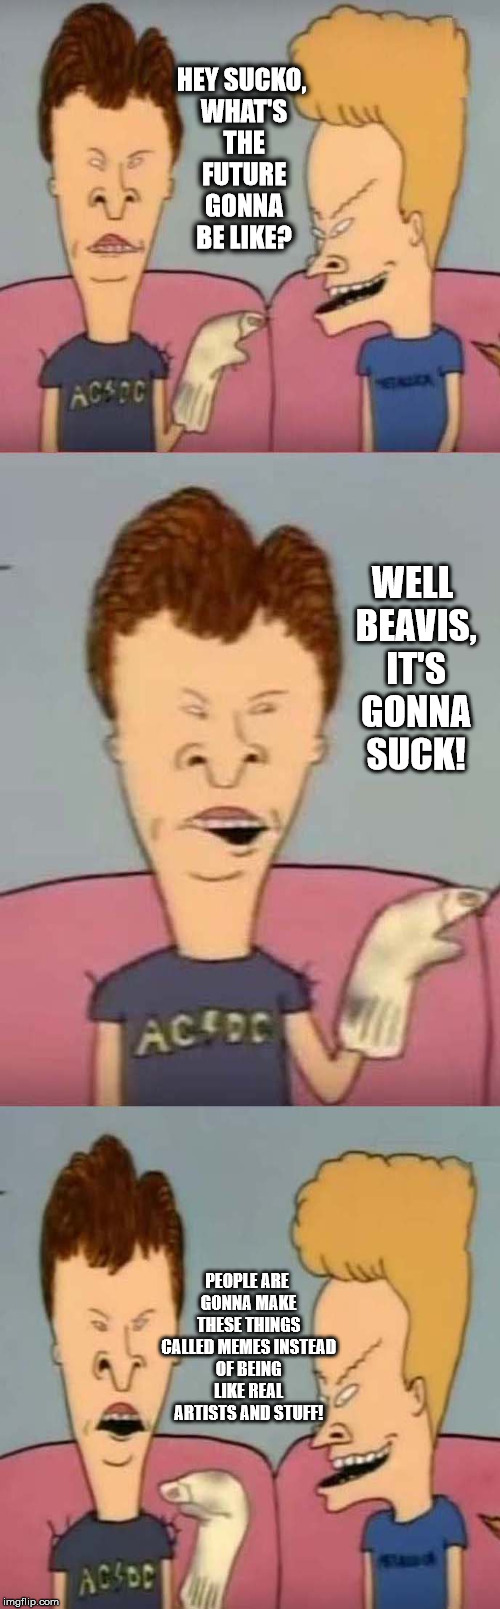 Beavis future 2 | HEY SUCKO, WHAT'S THE FUTURE GONNA BE LIKE? WELL BEAVIS, IT'S GONNA SUCK! PEOPLE ARE GONNA MAKE THESE THINGS CALLED MEMES INSTEAD OF BEING LIKE REAL ARTISTS AND STUFF! | image tagged in beavis and butthead,future,sleepdeprivationcreations | made w/ Imgflip meme maker